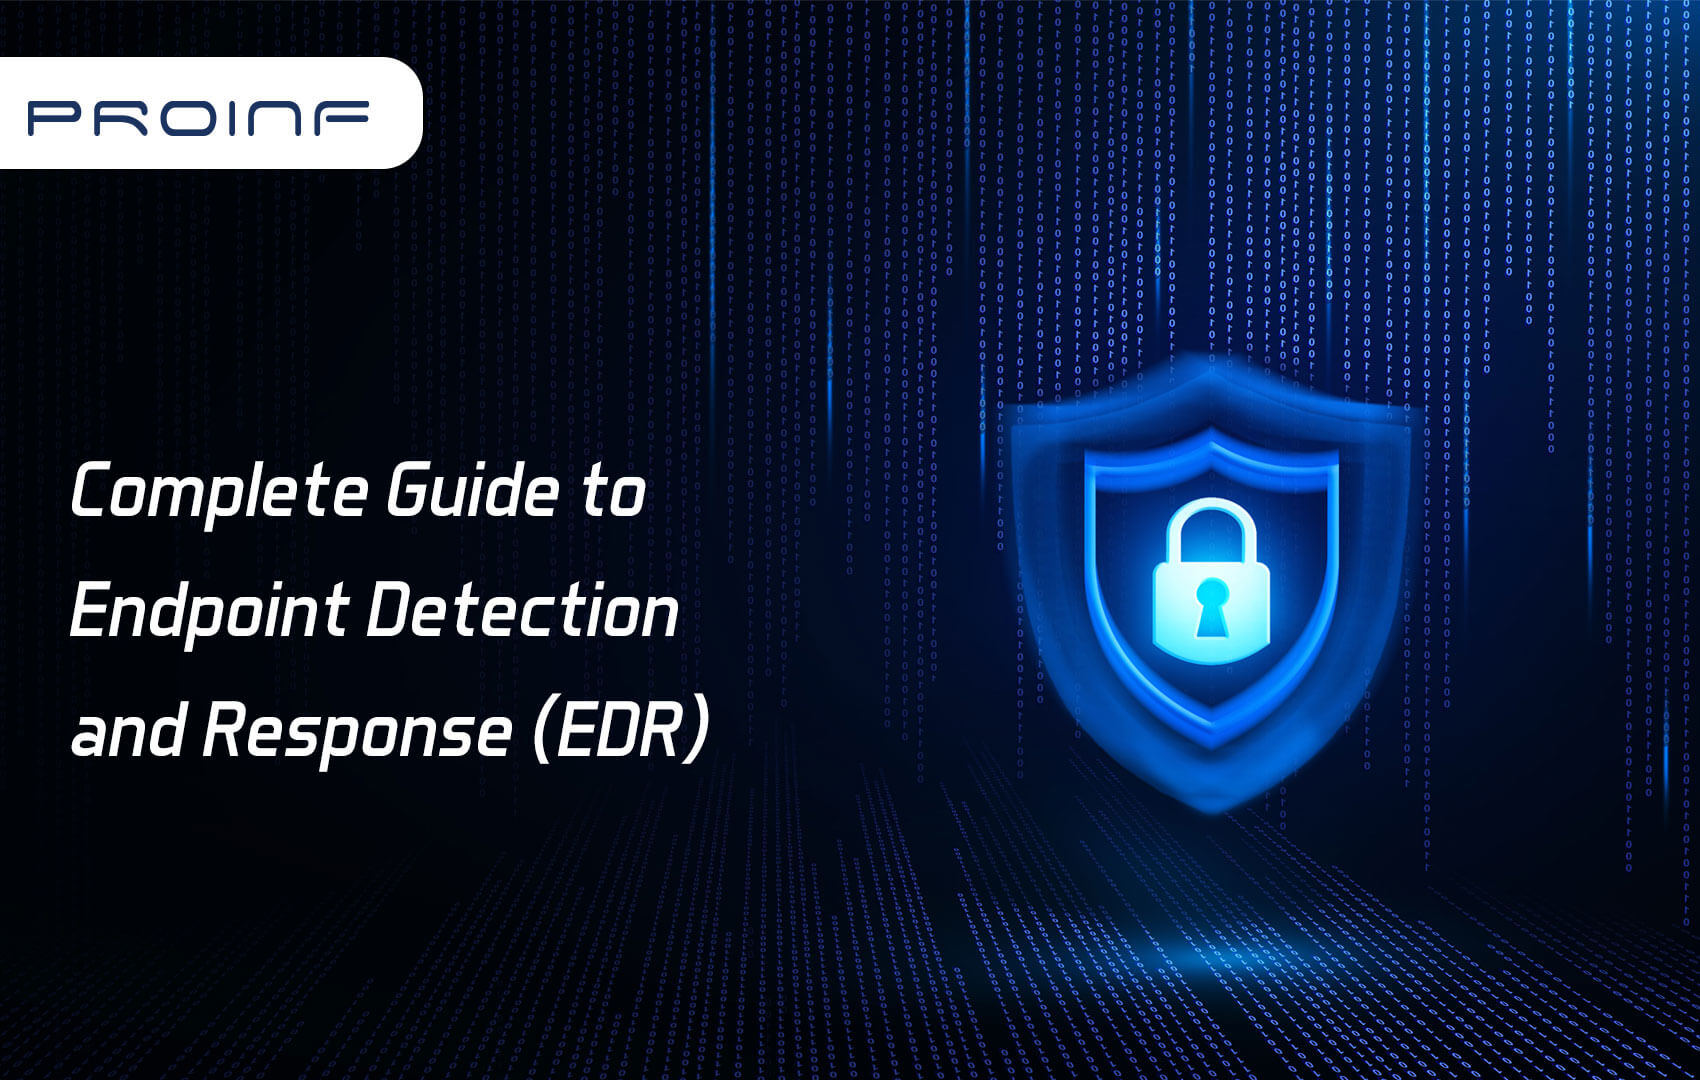 Complete Guide to Endpoint Detection and Response (EDR)